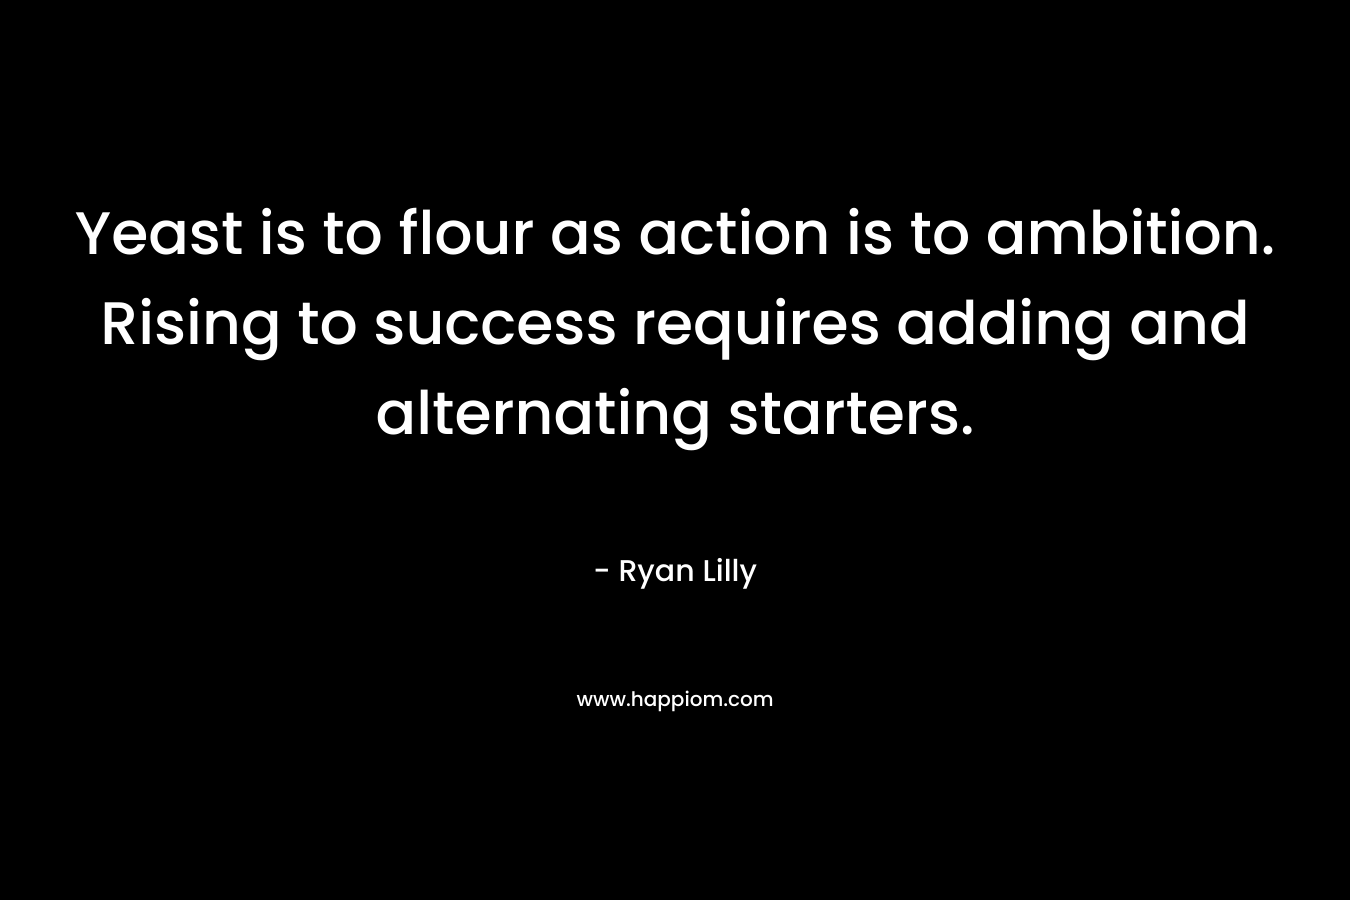 Yeast is to flour as action is to ambition. Rising to success requires adding and alternating starters. – Ryan Lilly